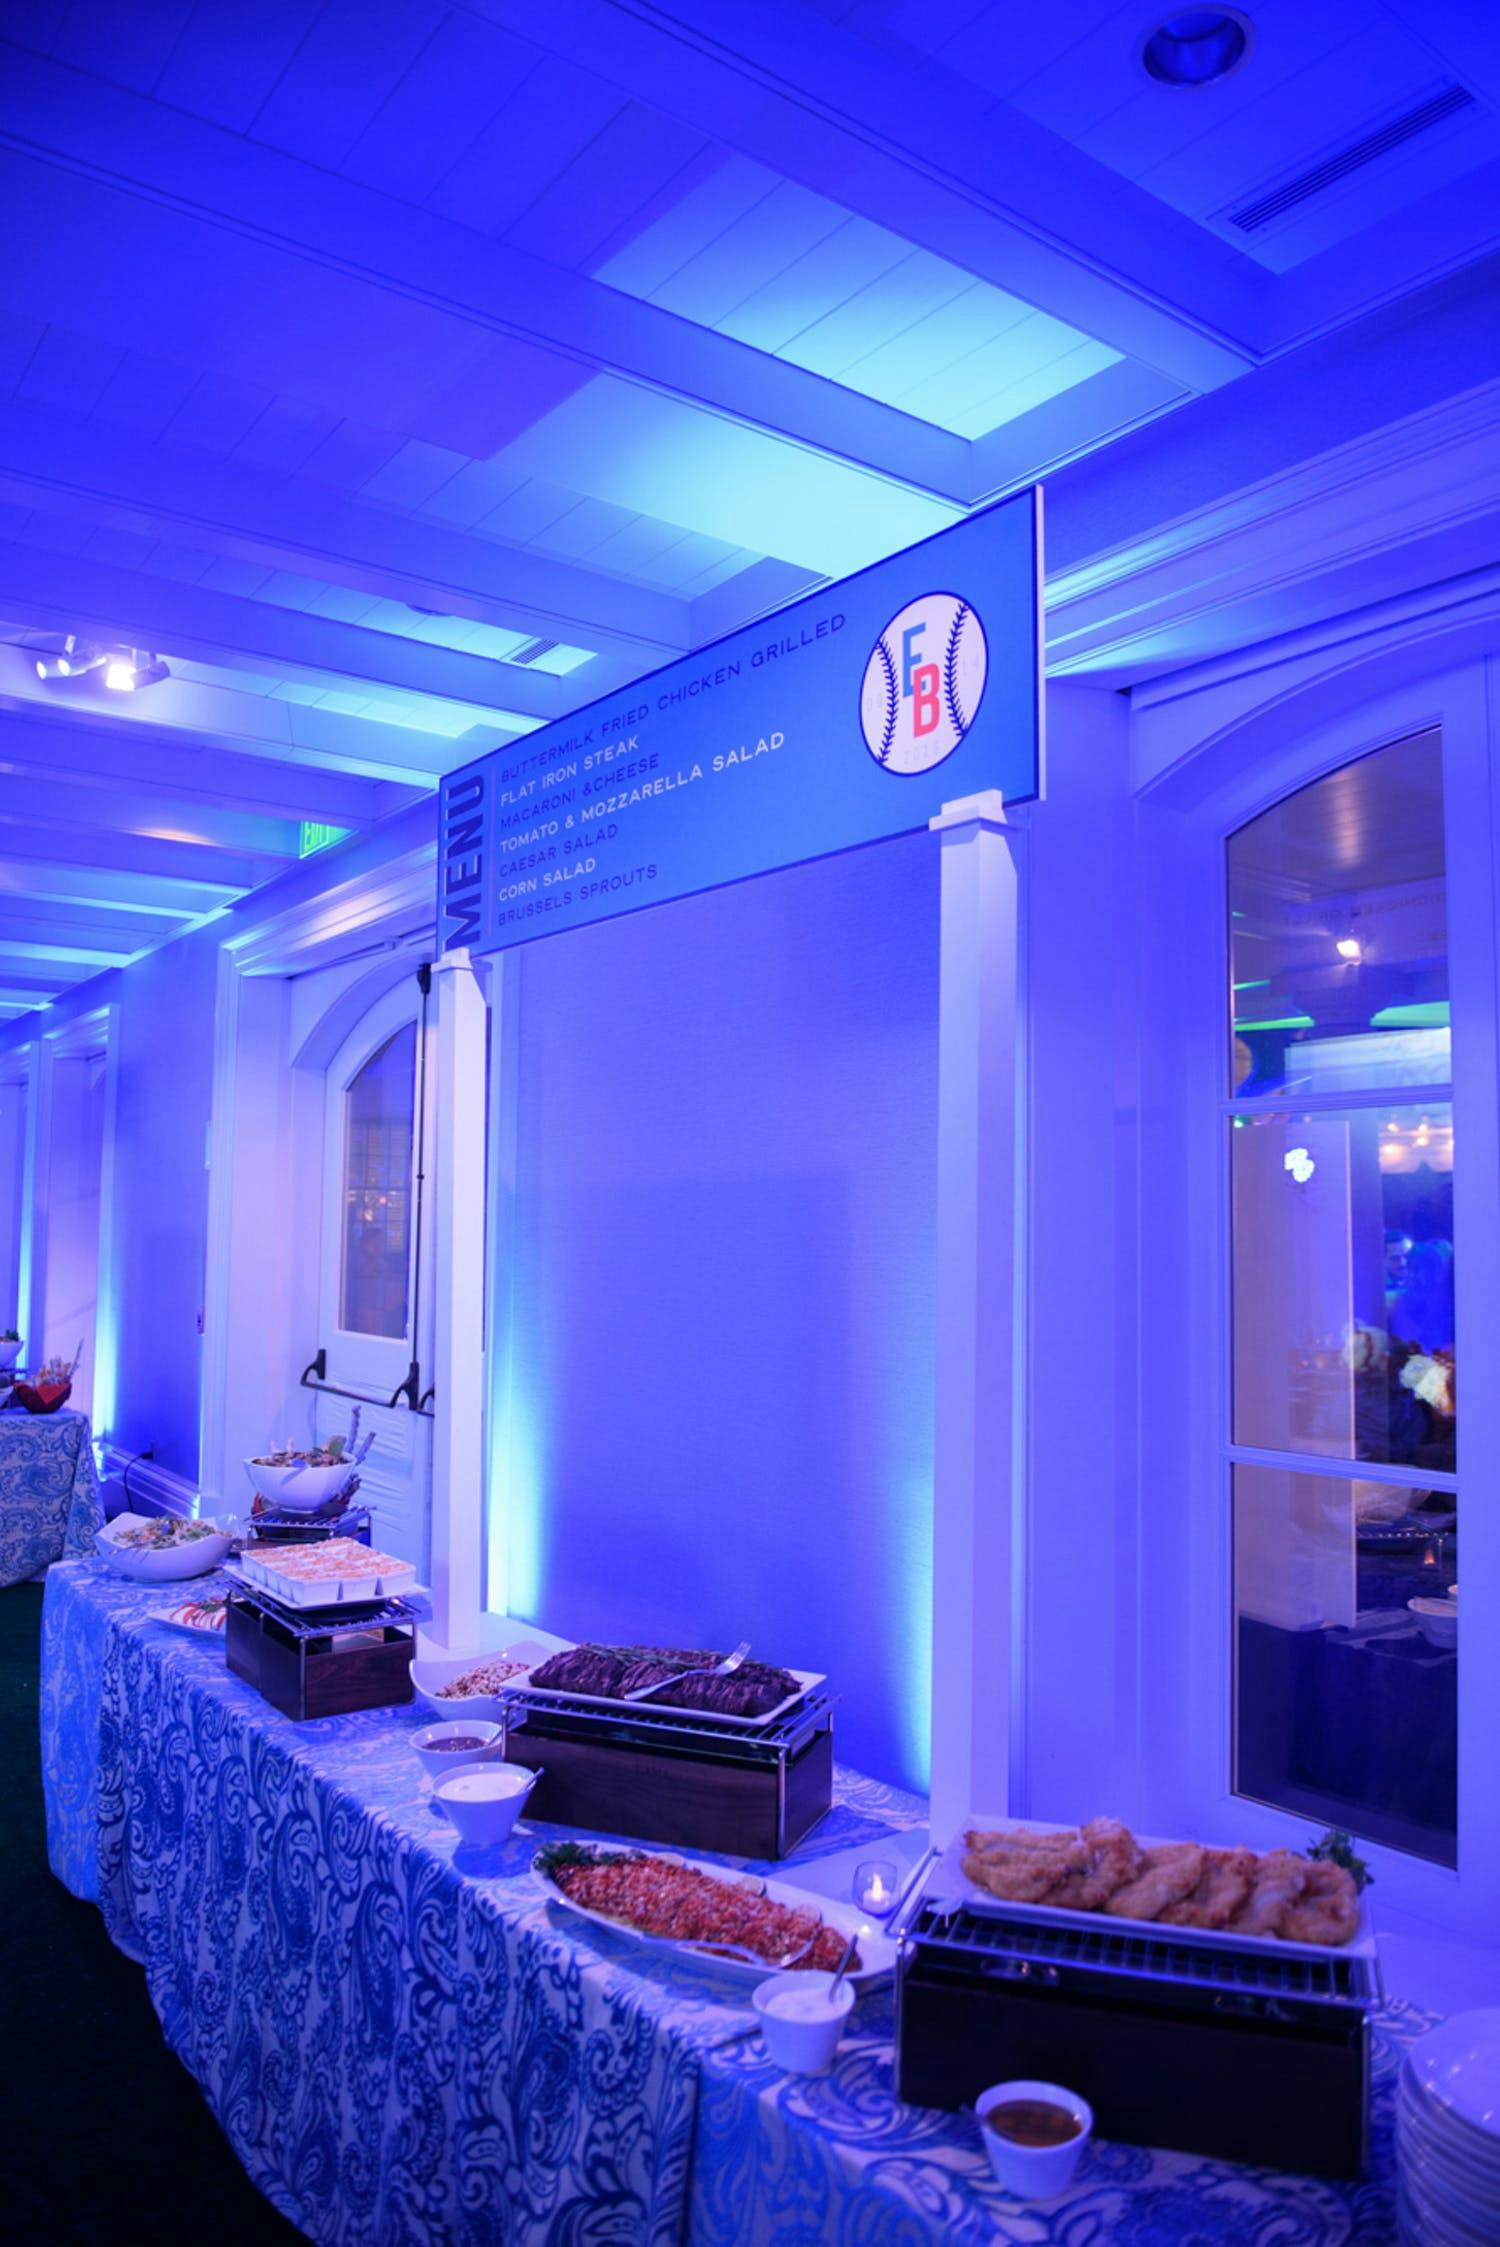 Food Station at Glow-in-the-Dark Baseball-Themed Bar Mitzvah Party | PartySlate